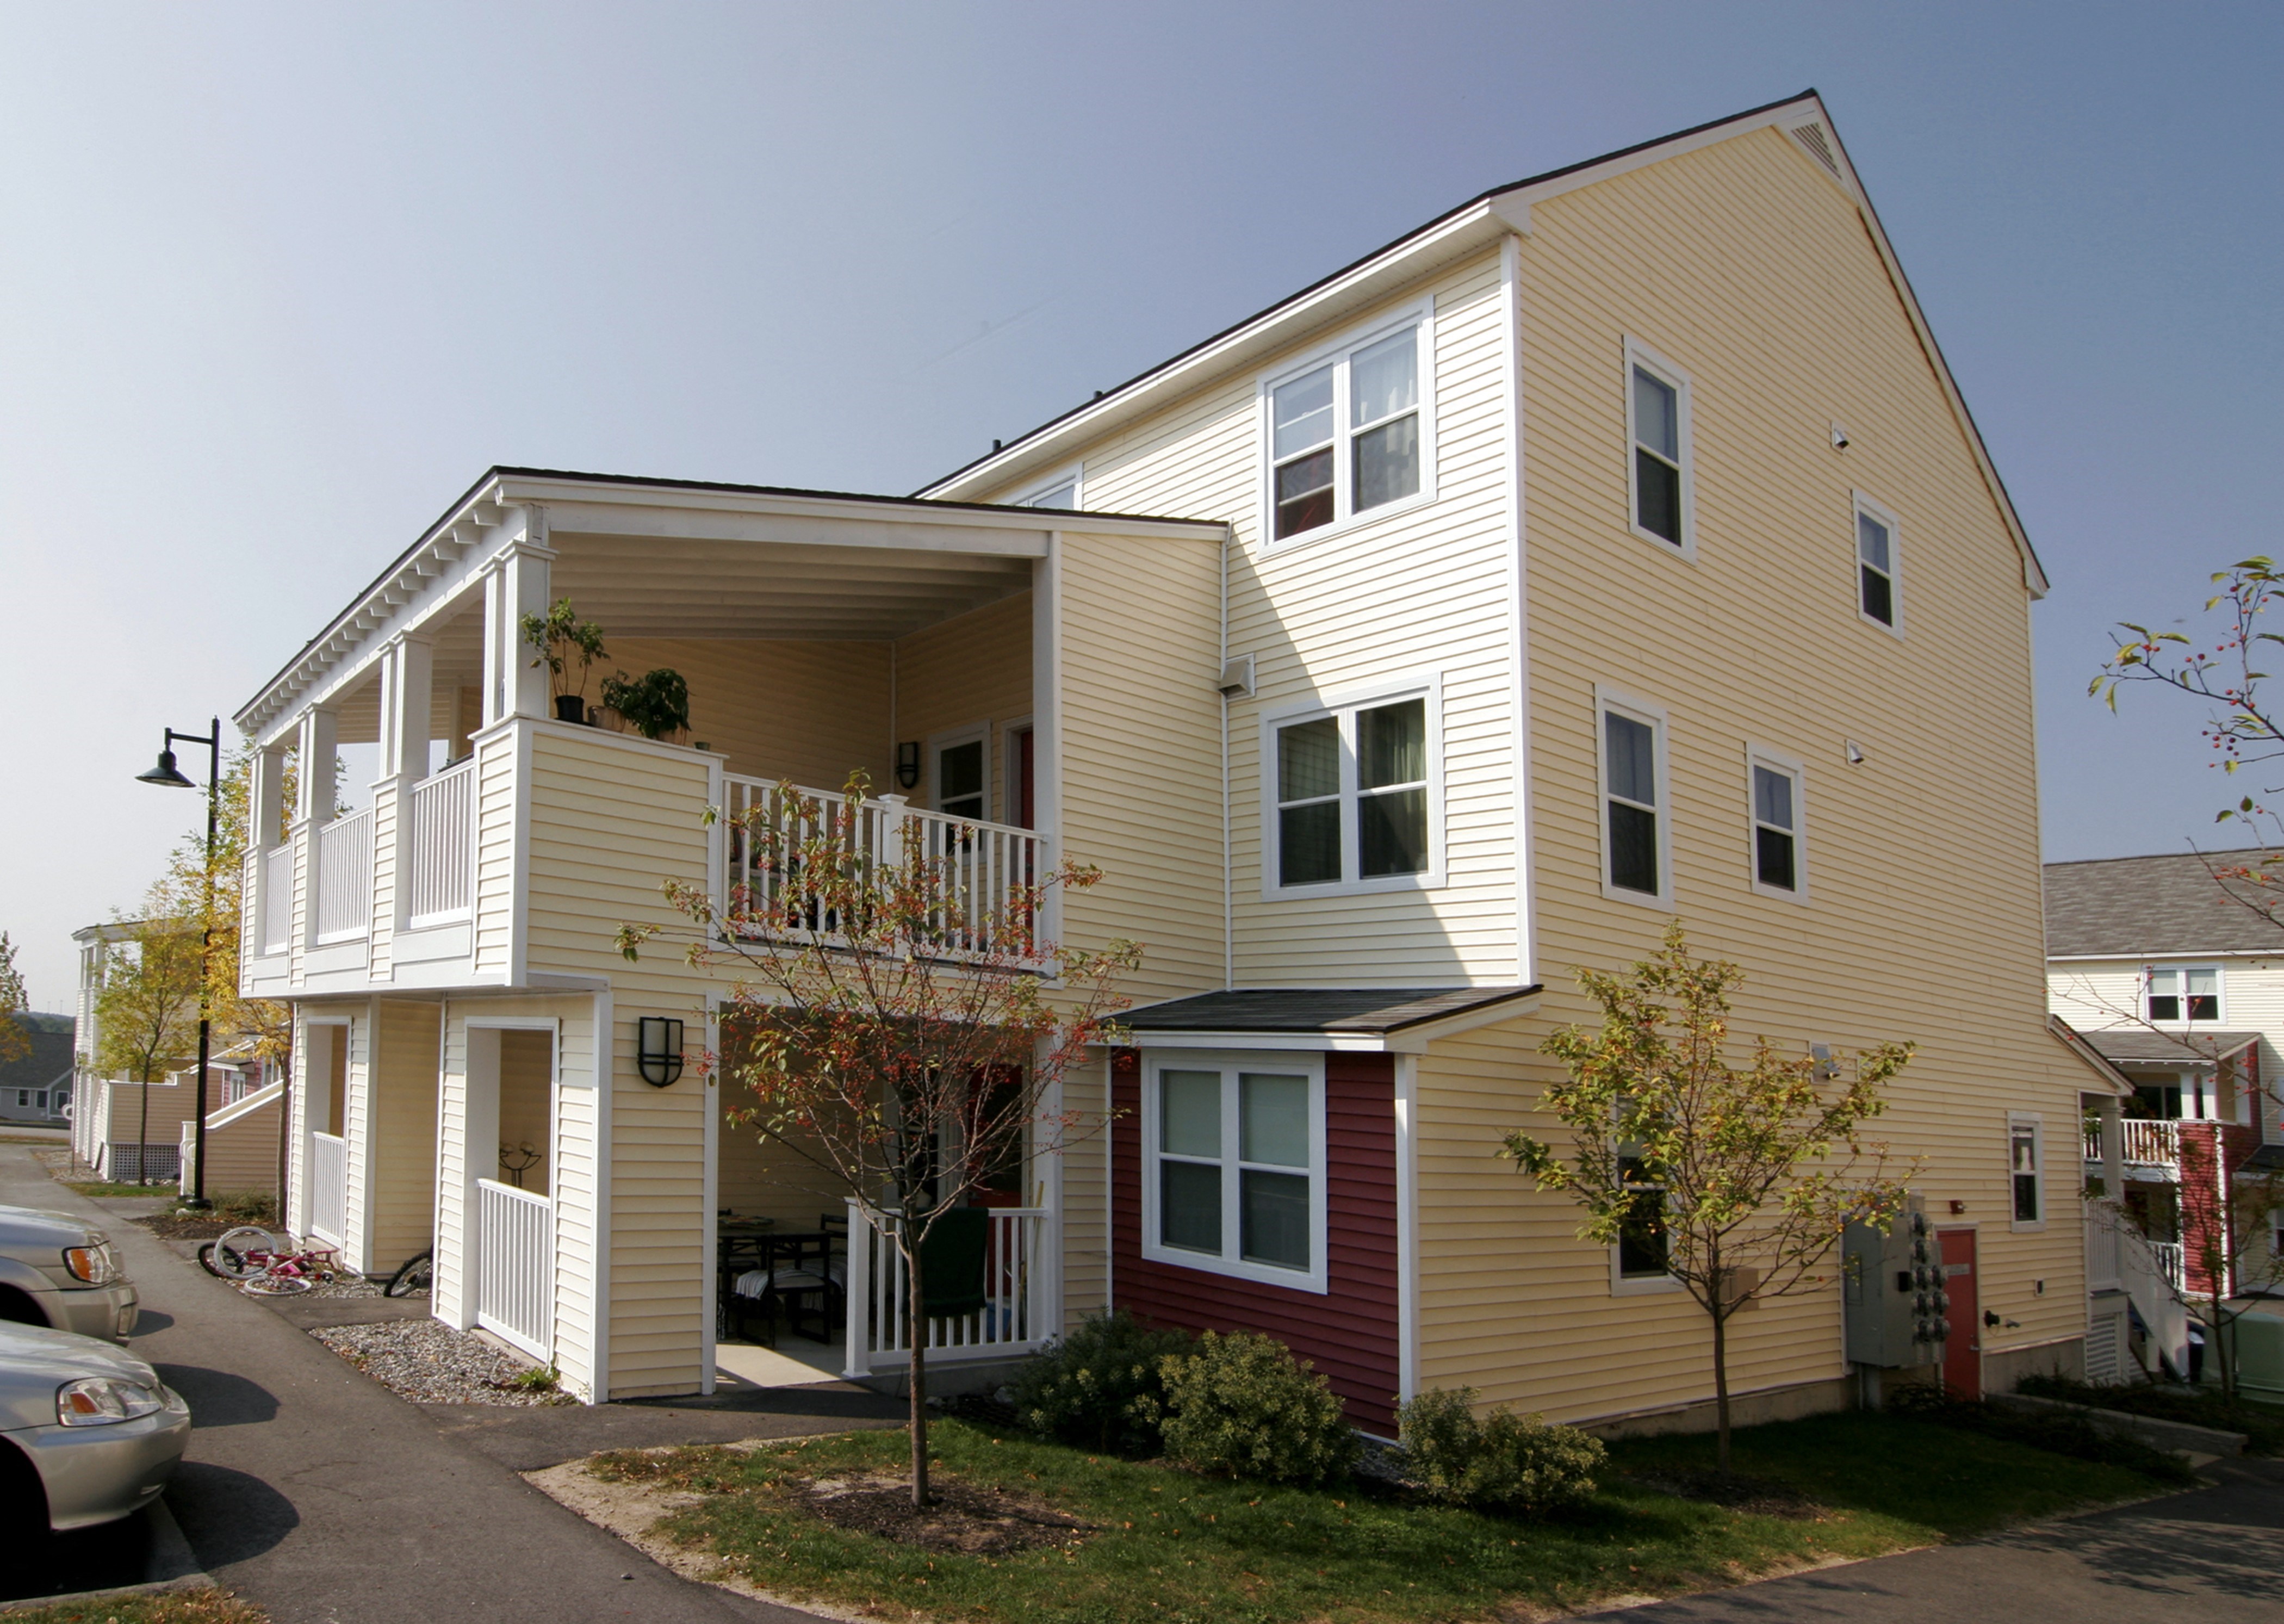 BRICK HILL TOWNHOUSES - 2 Townhouse Dr, South Portland, Maine - Apartments  - Phone Number - Yelp